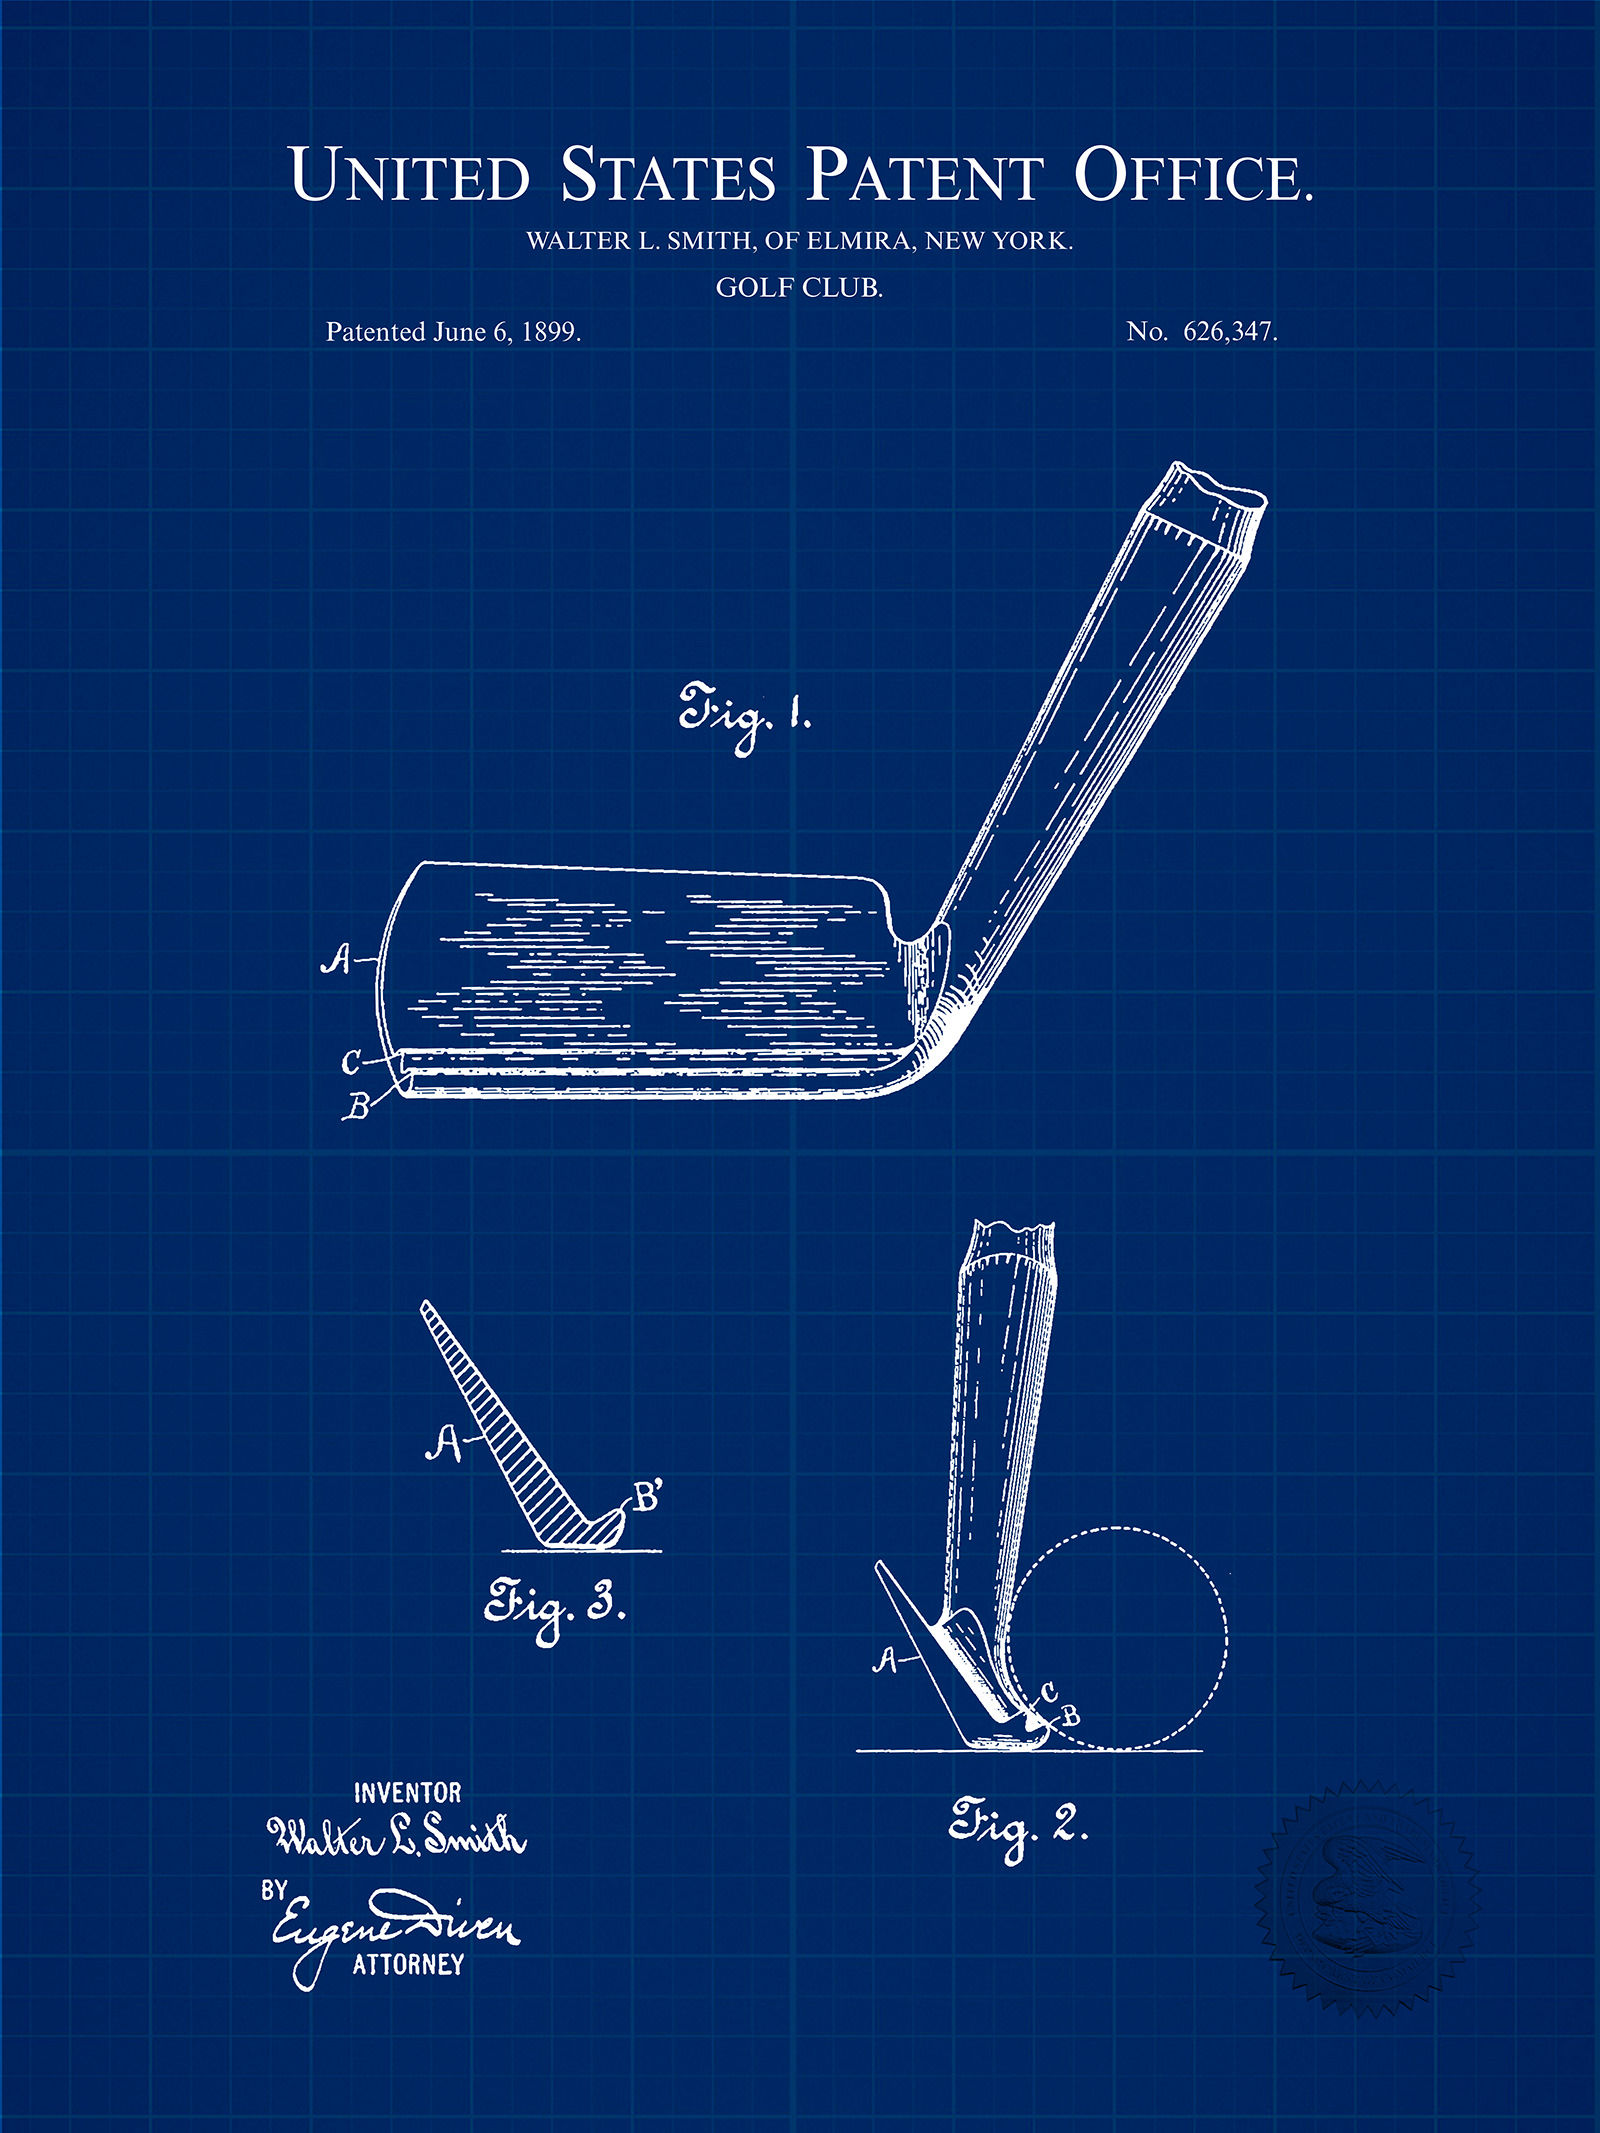 Vintage Metallic Golf Club Head Patent Drawing Poster — MUSEUM OUTLETS